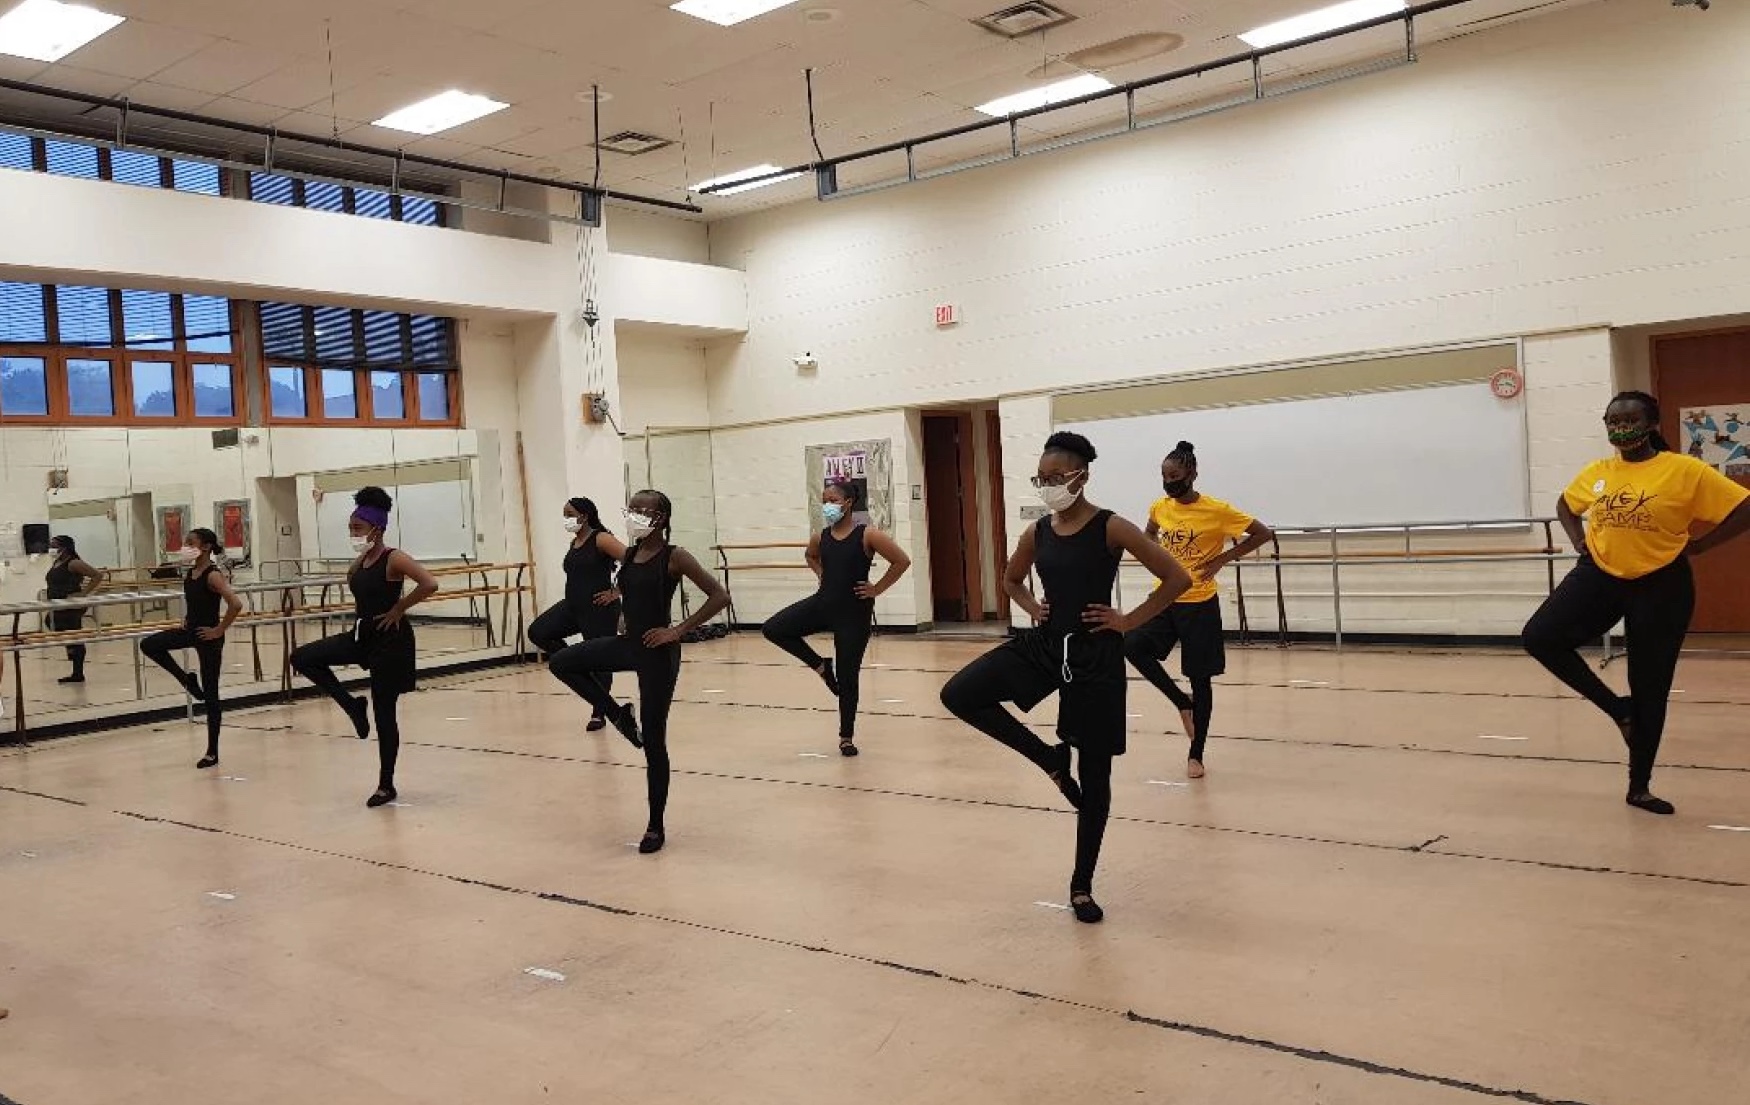 PASS IT ON: Master teacher explores broader purposes for dance